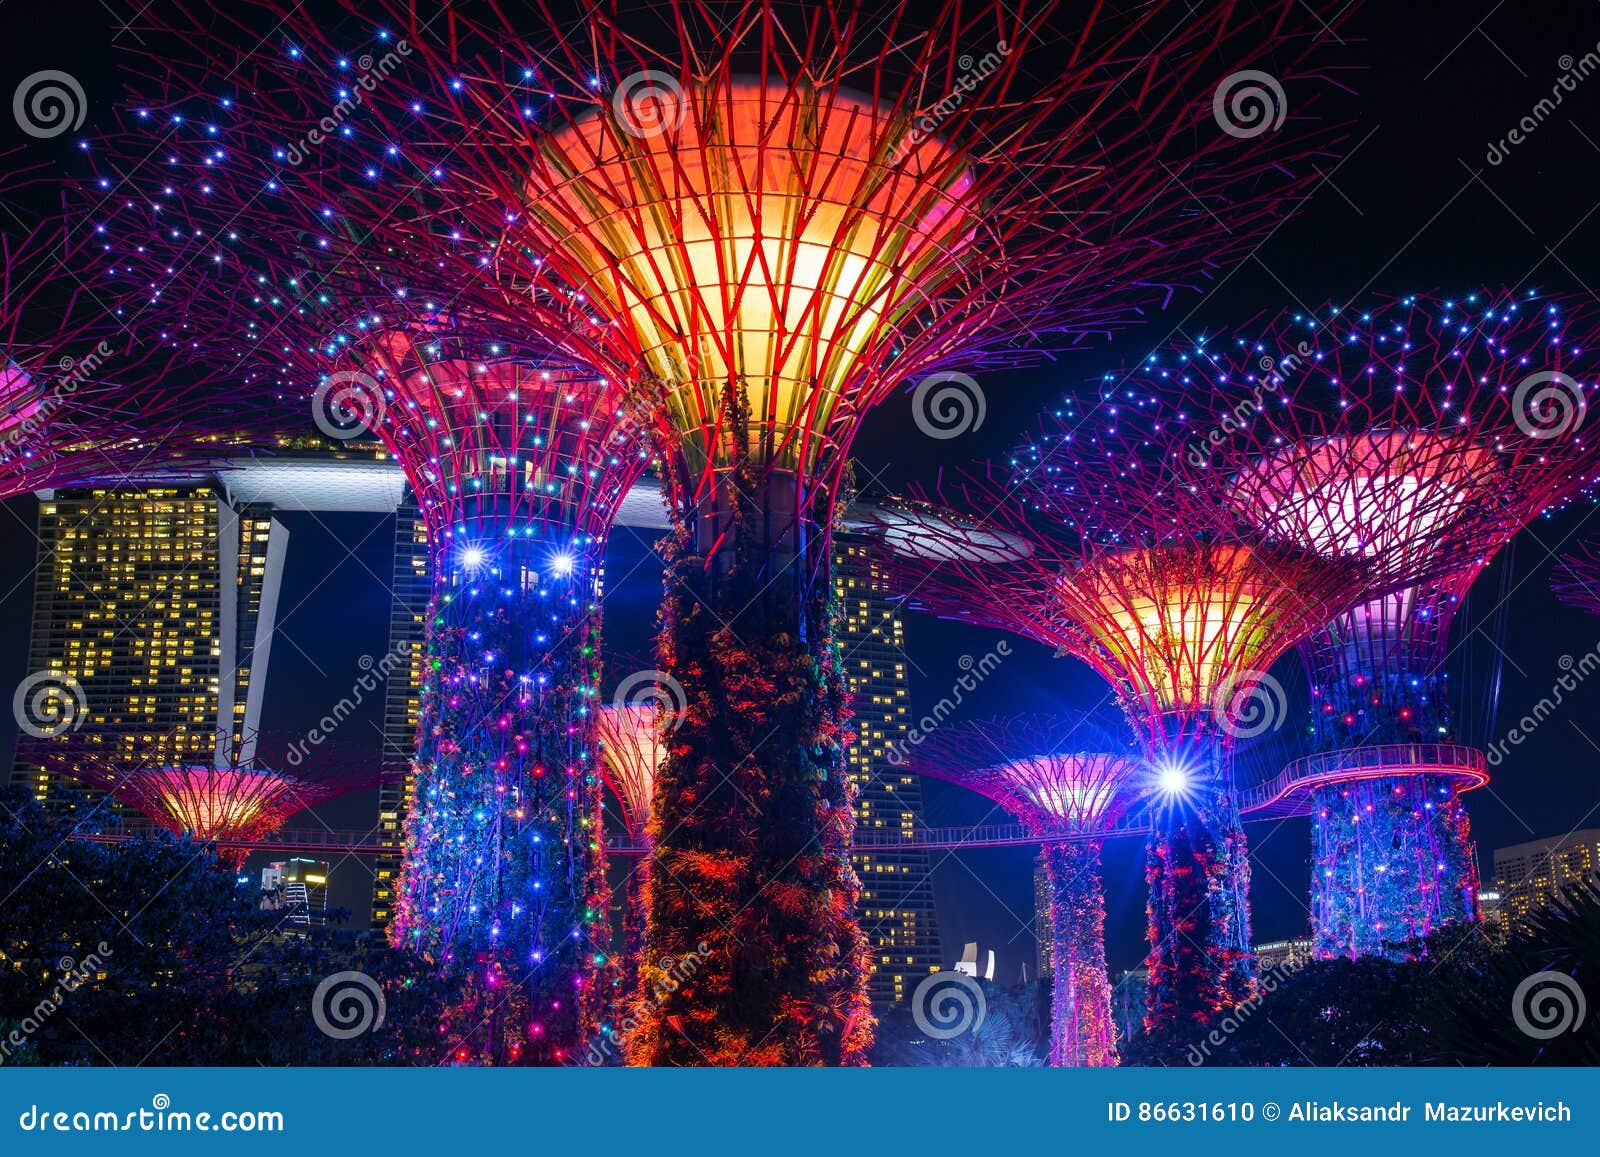 Night View Of Illuminated Supertree Grove At Gardens By The Bay In